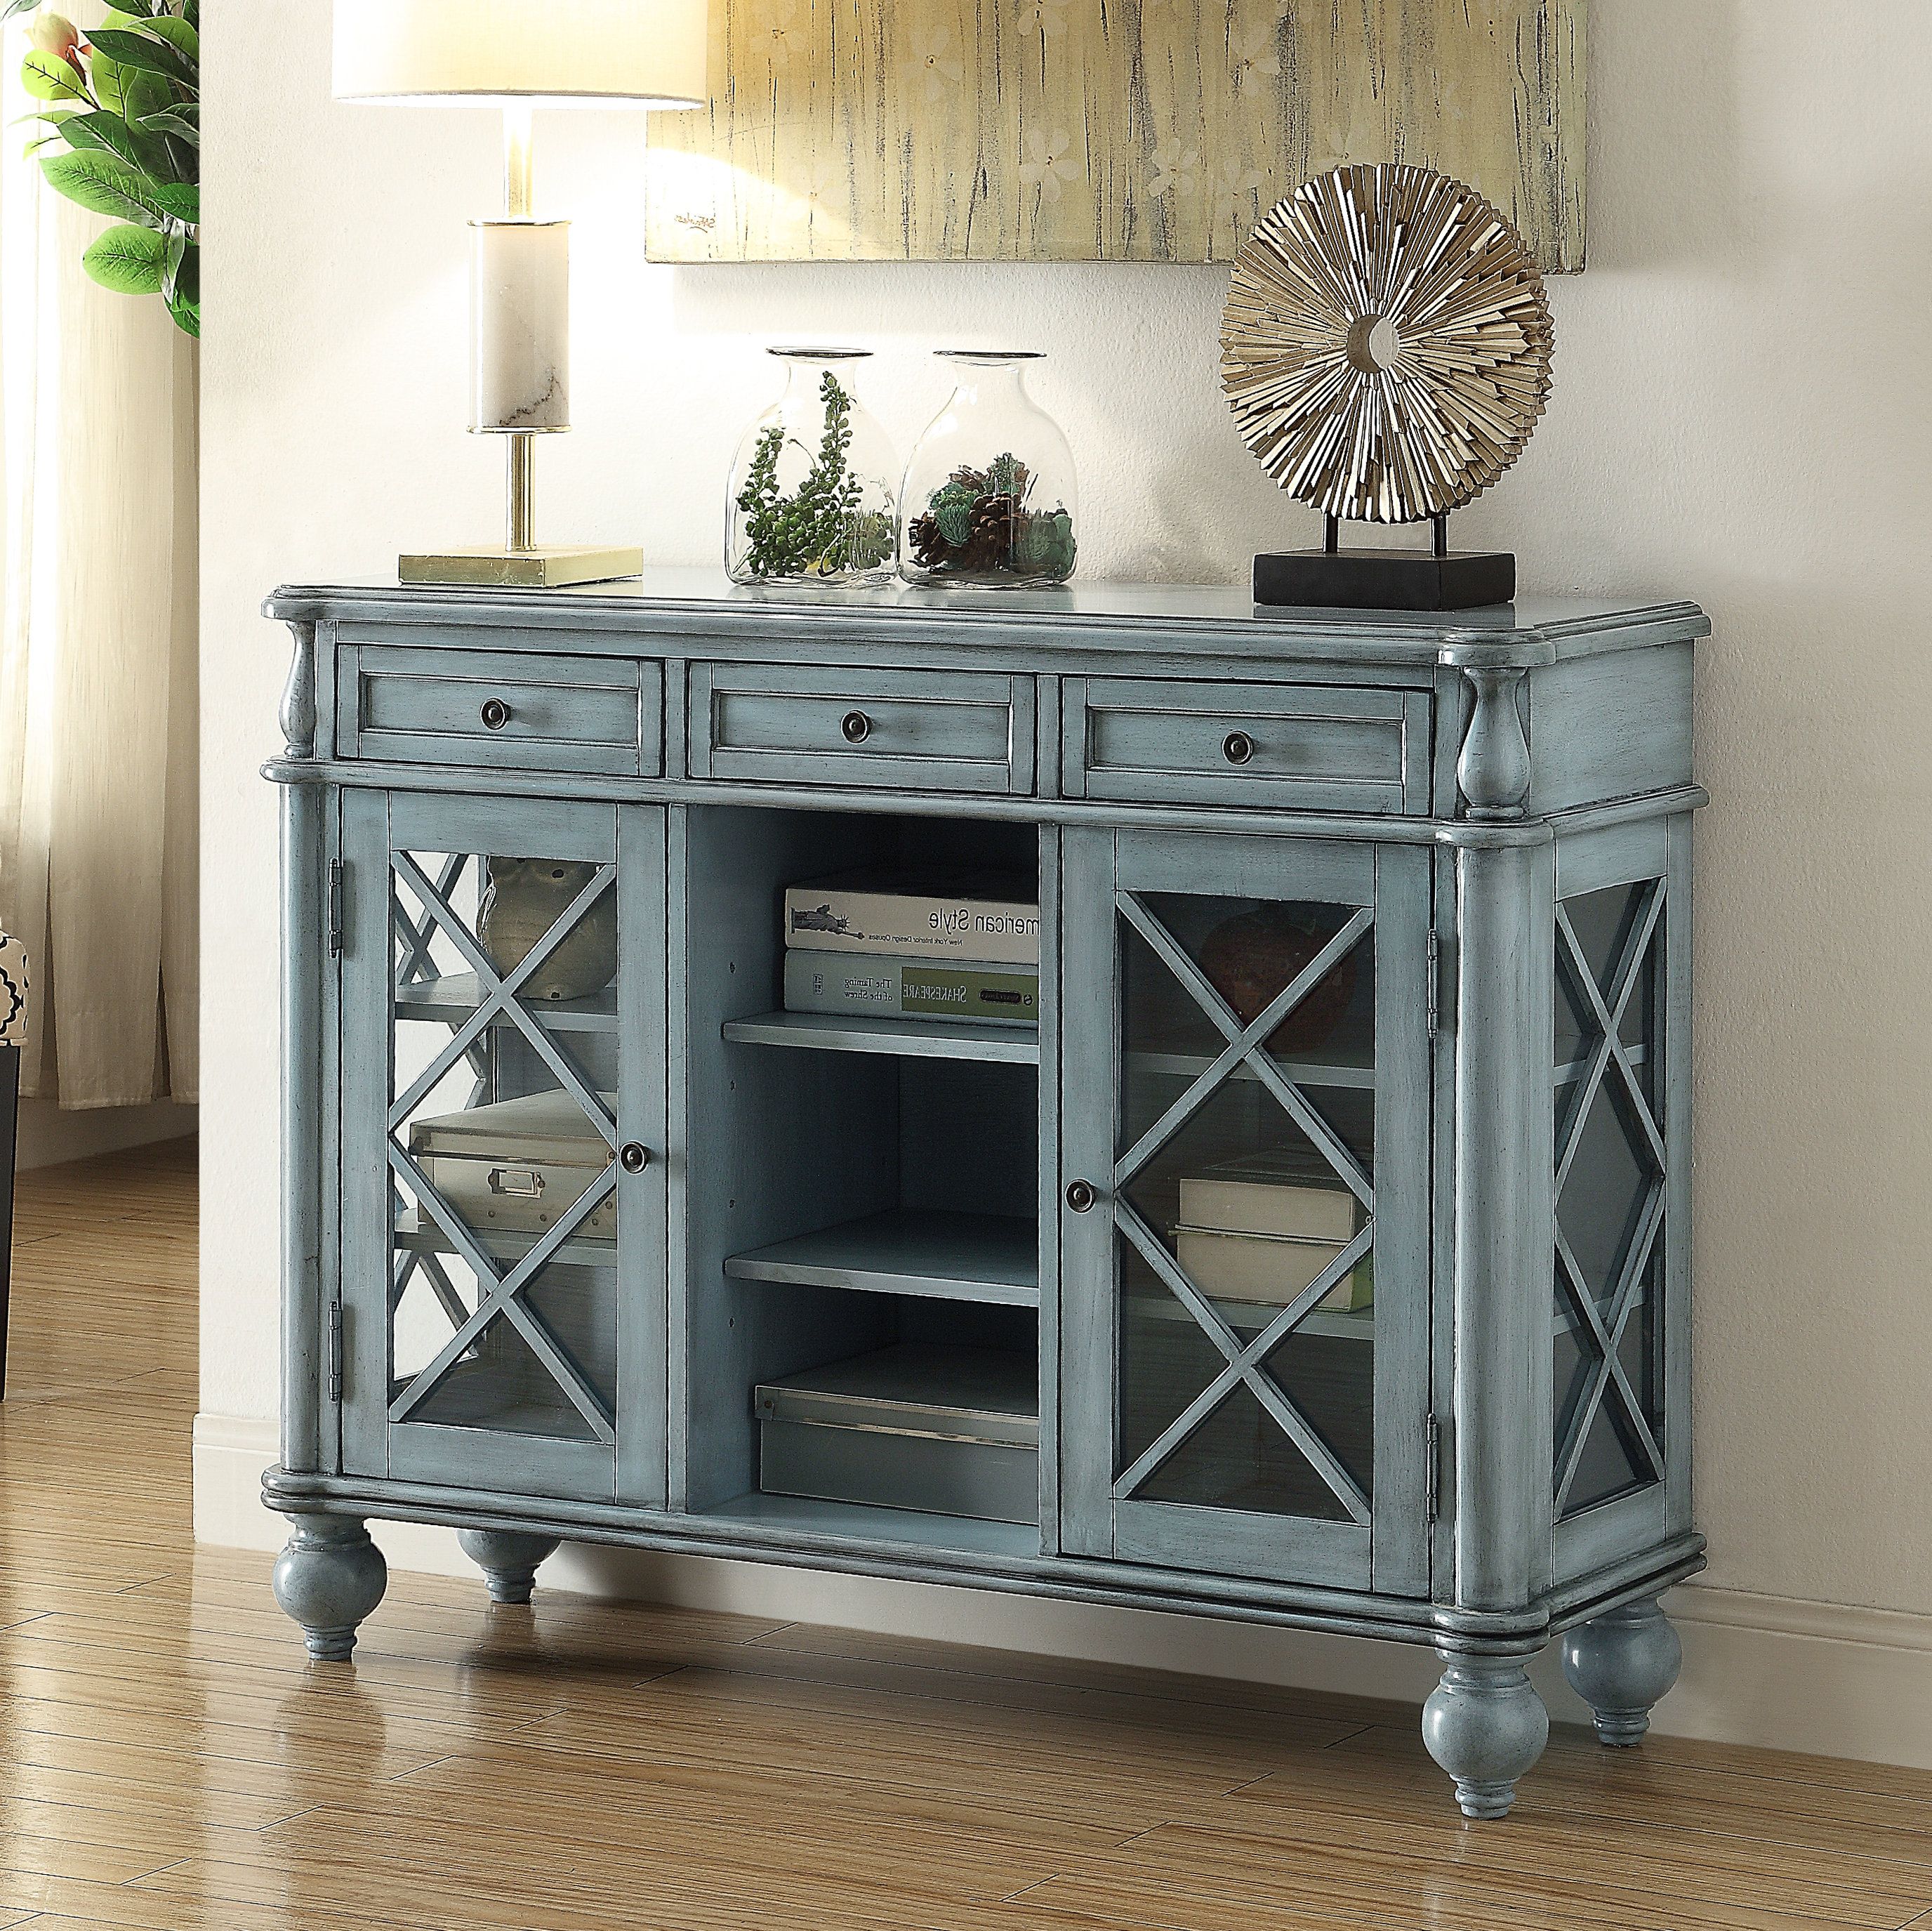 Sideboards & Buffet Tables You'll Love In 2019 | Wayfair Within Chicoree Charlena Sideboards (View 8 of 20)